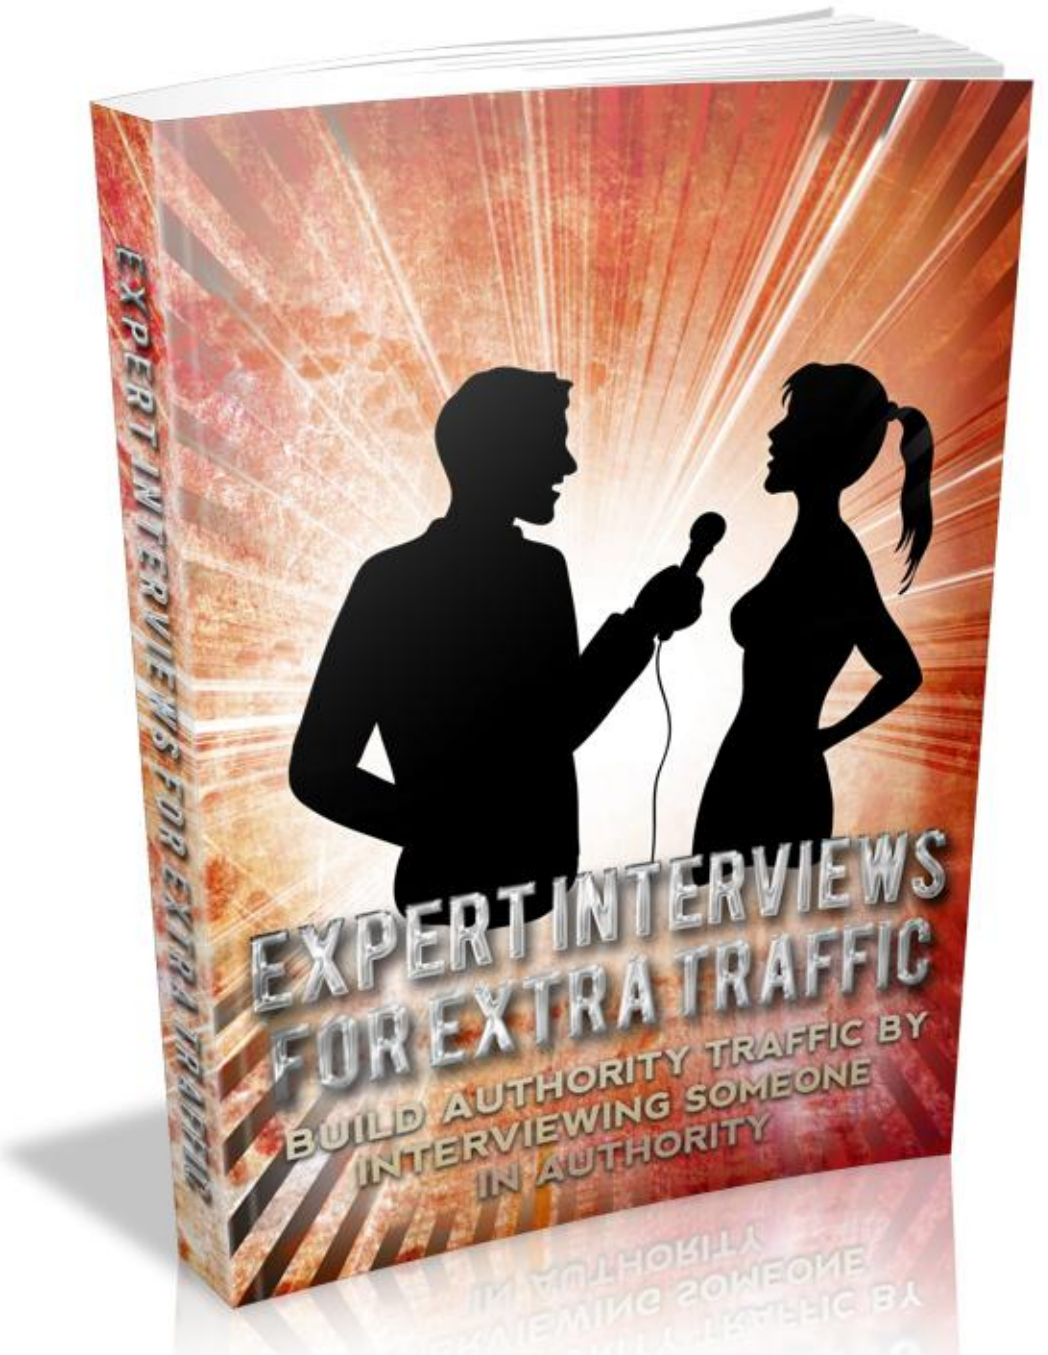 Expert Interviews For Extra Traffic